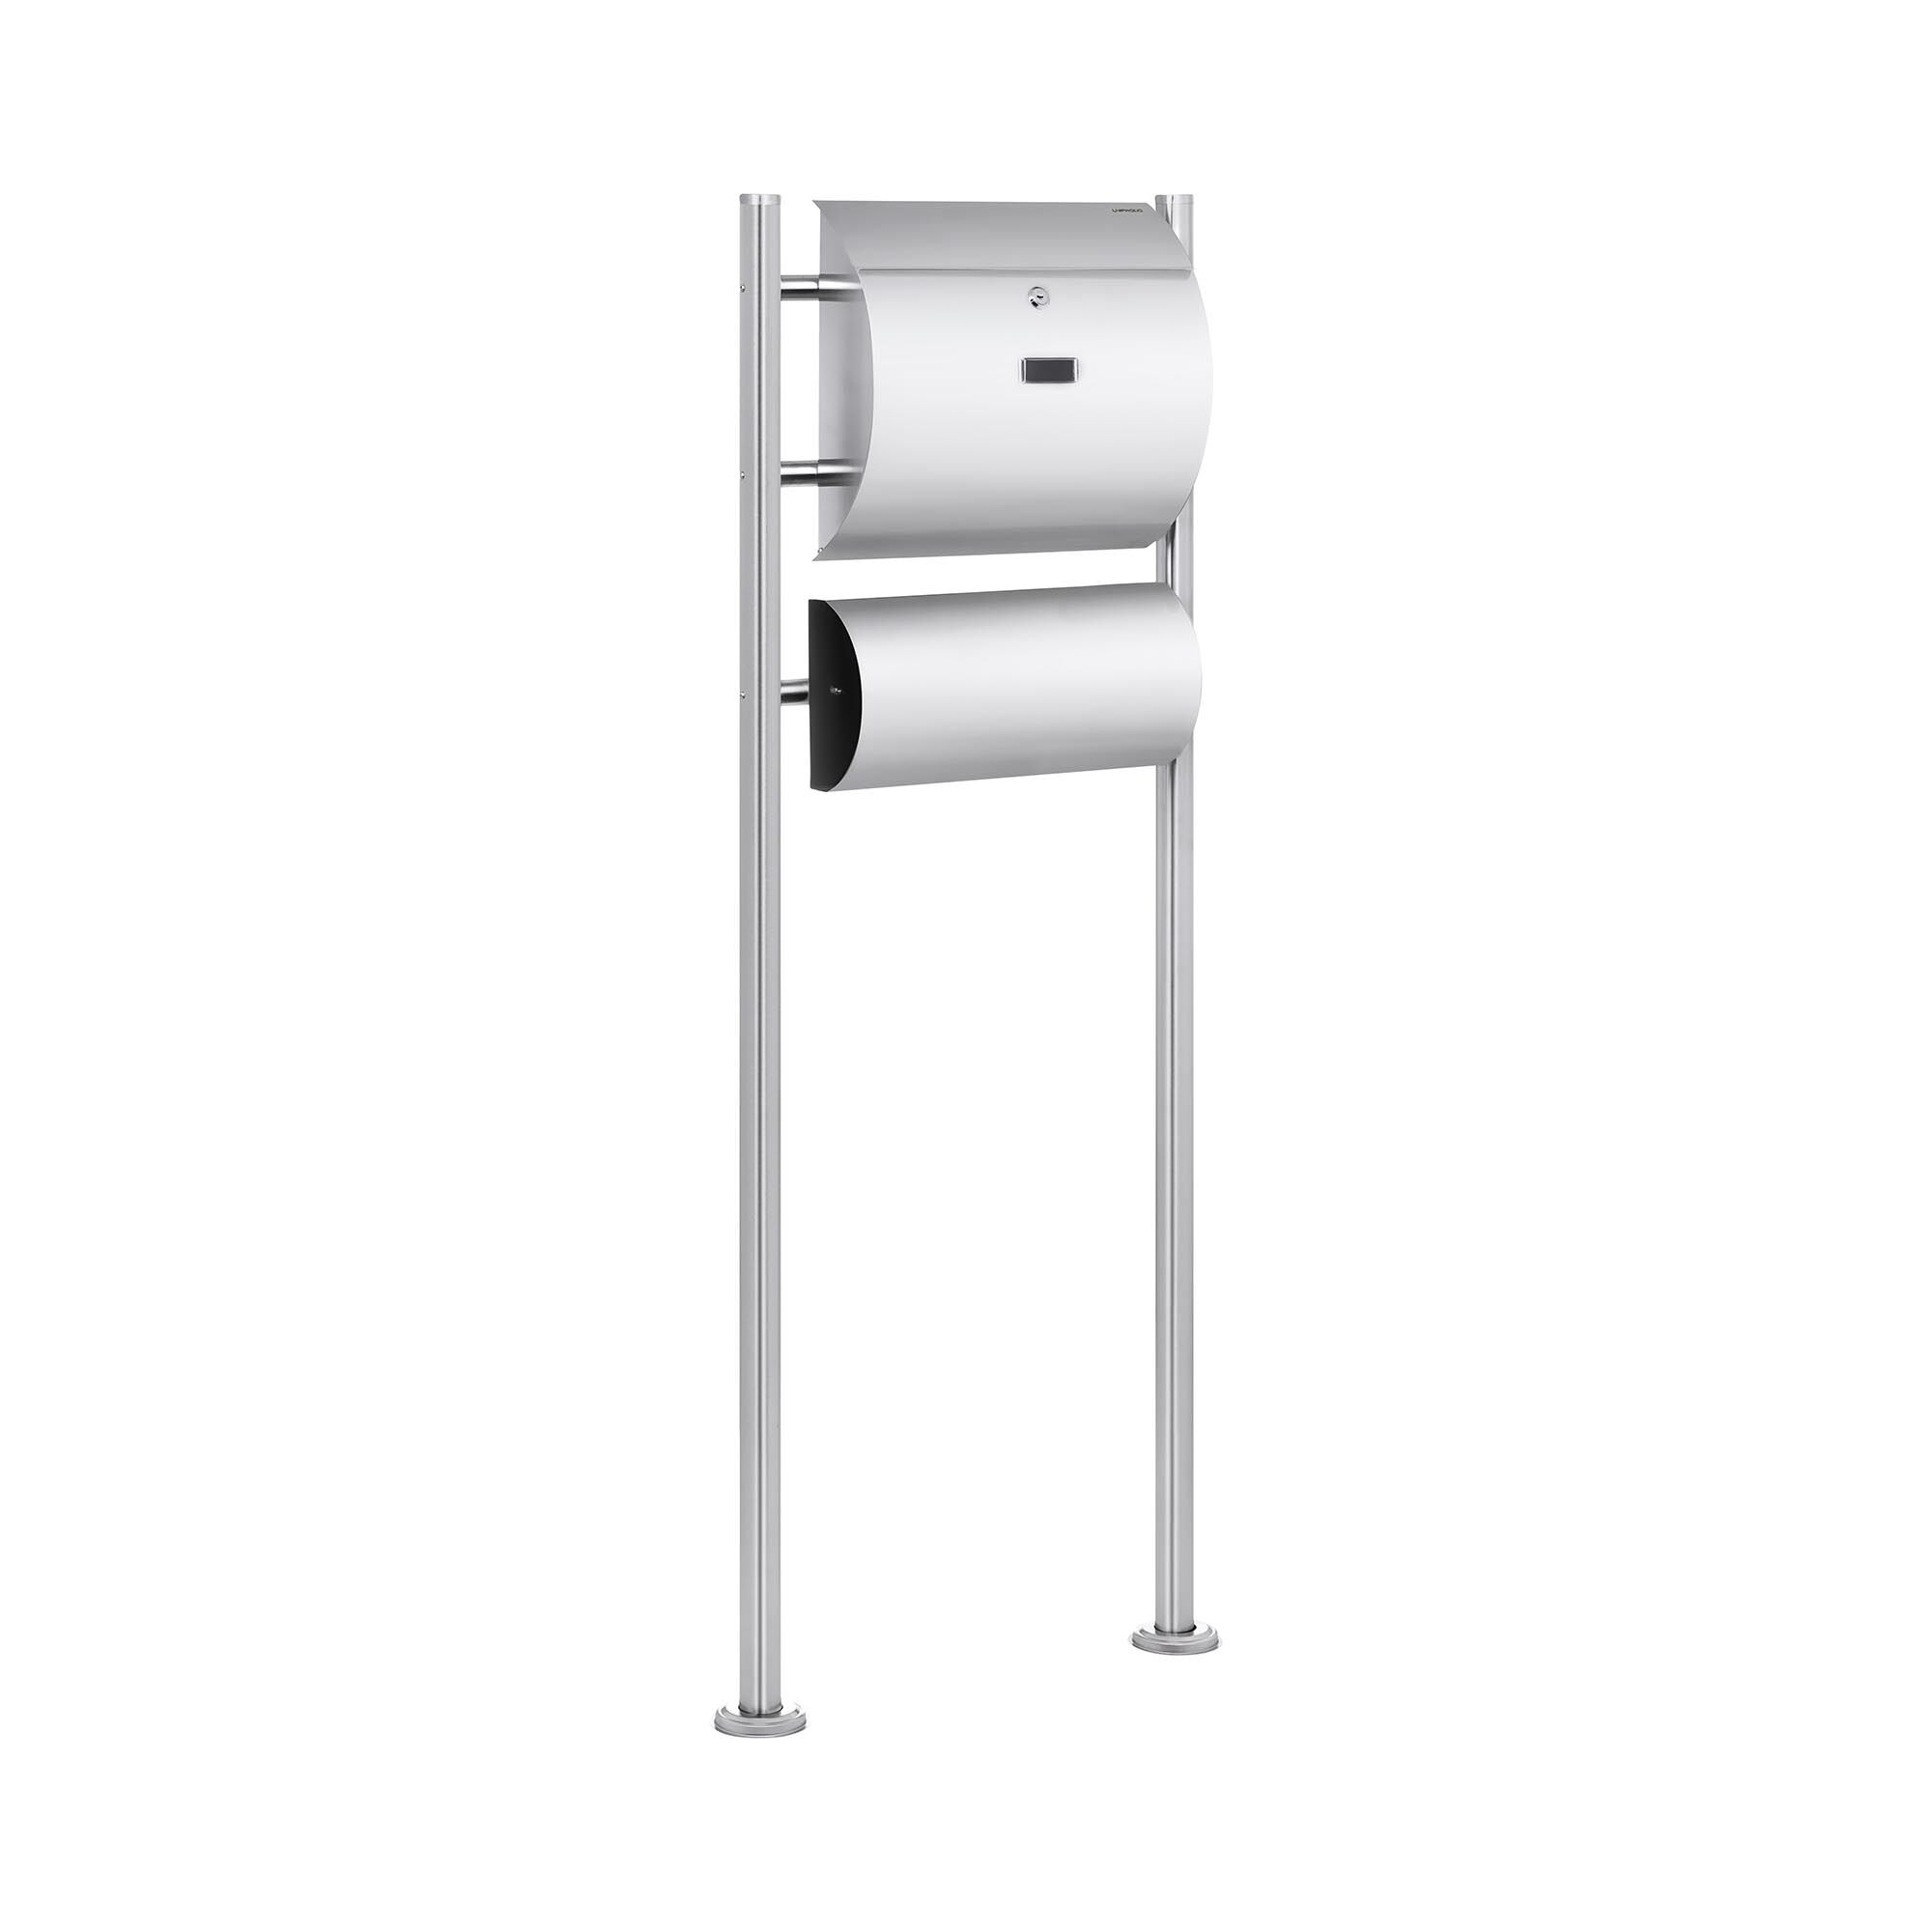 Uniprodo Factory seconds Stainless Steel Postbox - 1 Mailbox Plus A Newspaper Compartment UNI_LETTER_02